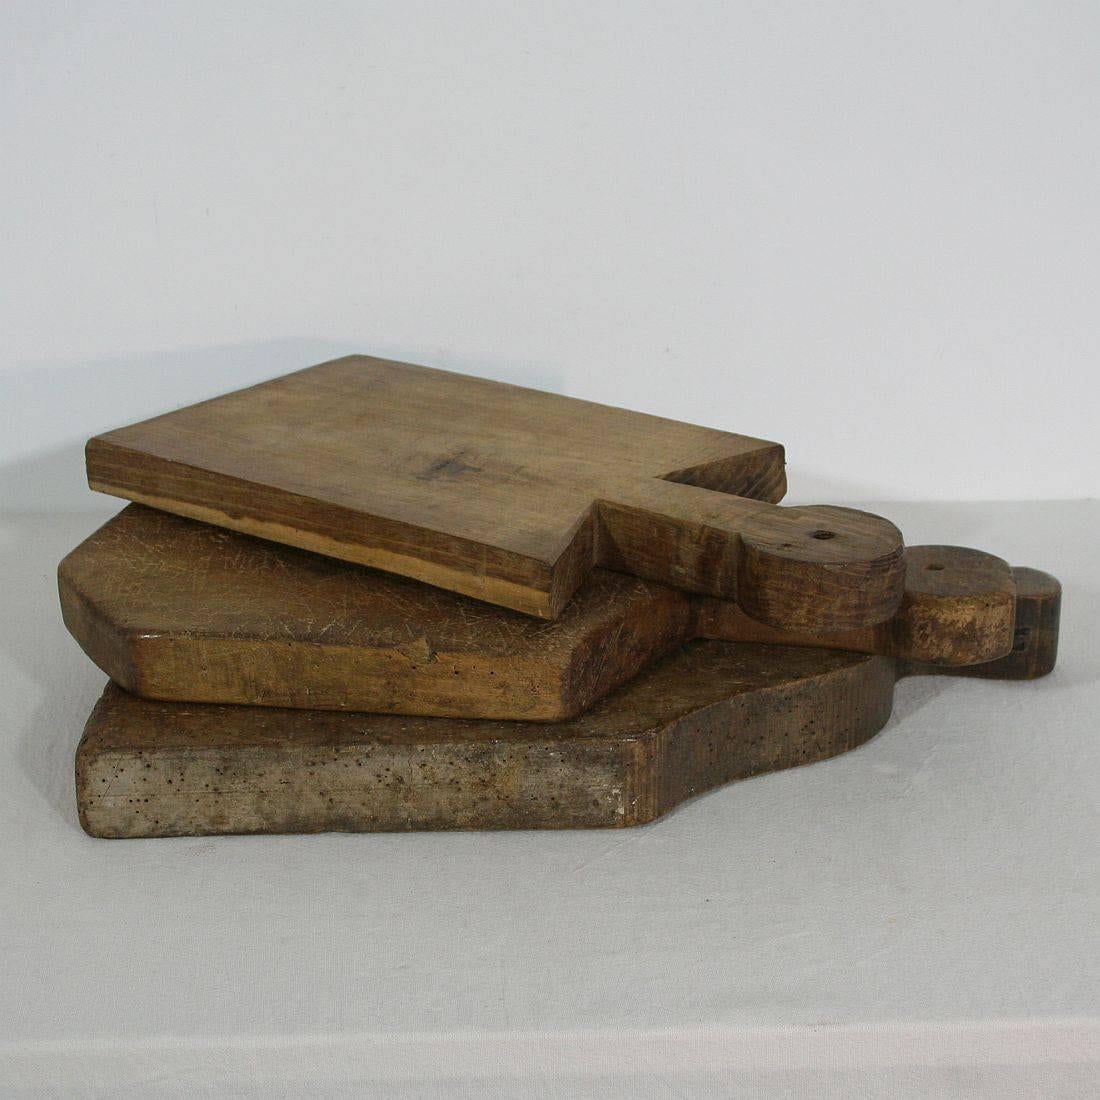 Beautiful small collection of three wooden chopping-cutting boards. Great statement on your counter-top
France, circa 1850-1900. Weathered.
Measures: H 41.5-49cm (16,25-19,25in) W 20.5-39cm (8-15,25in) D 3-5cm (1,25-2in) each, together: D